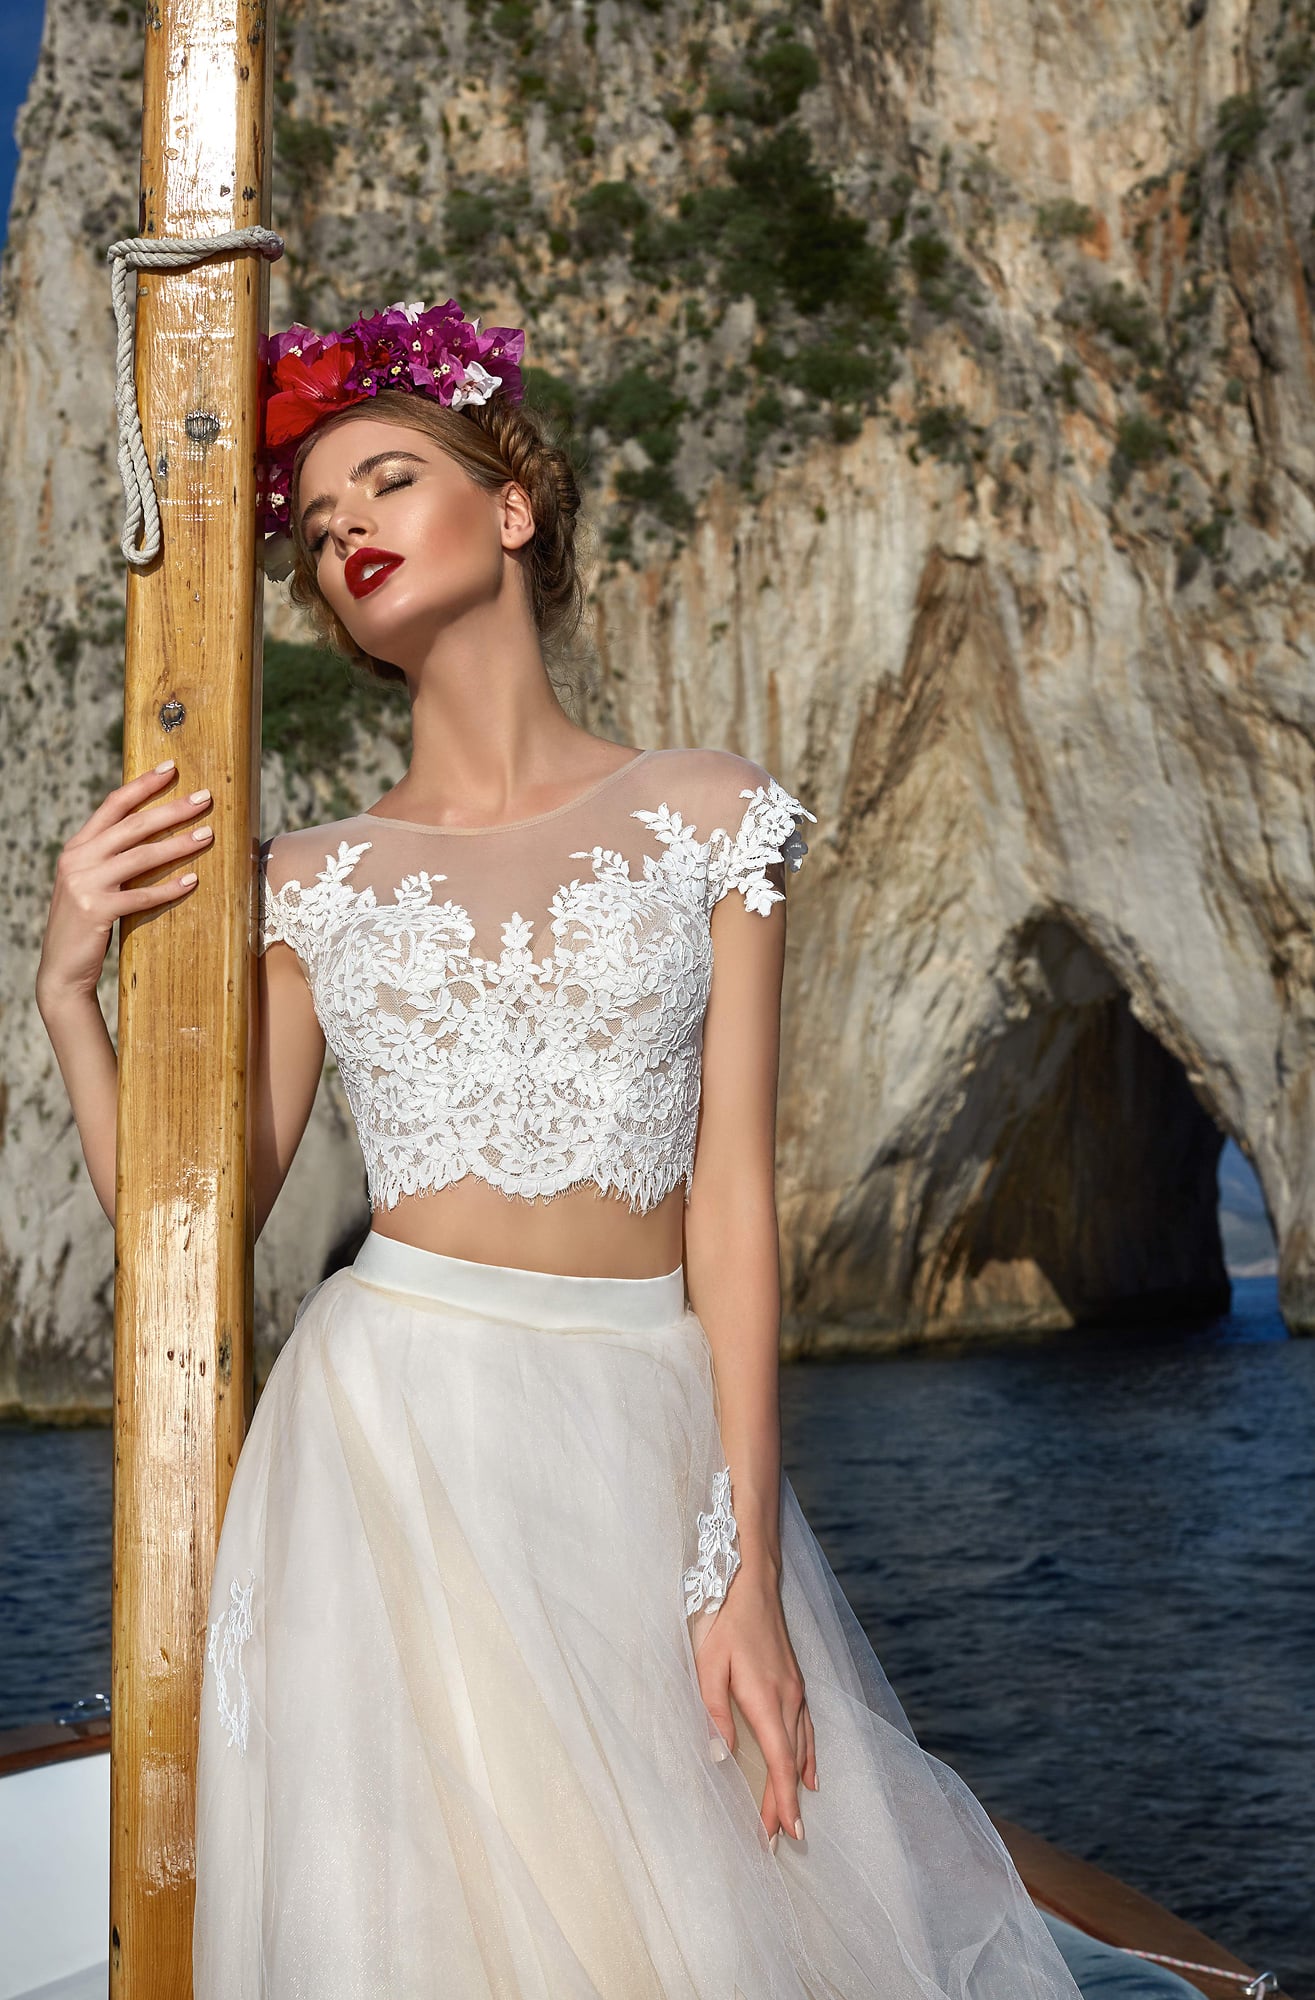 A beach wedding dress with separate top and skirt